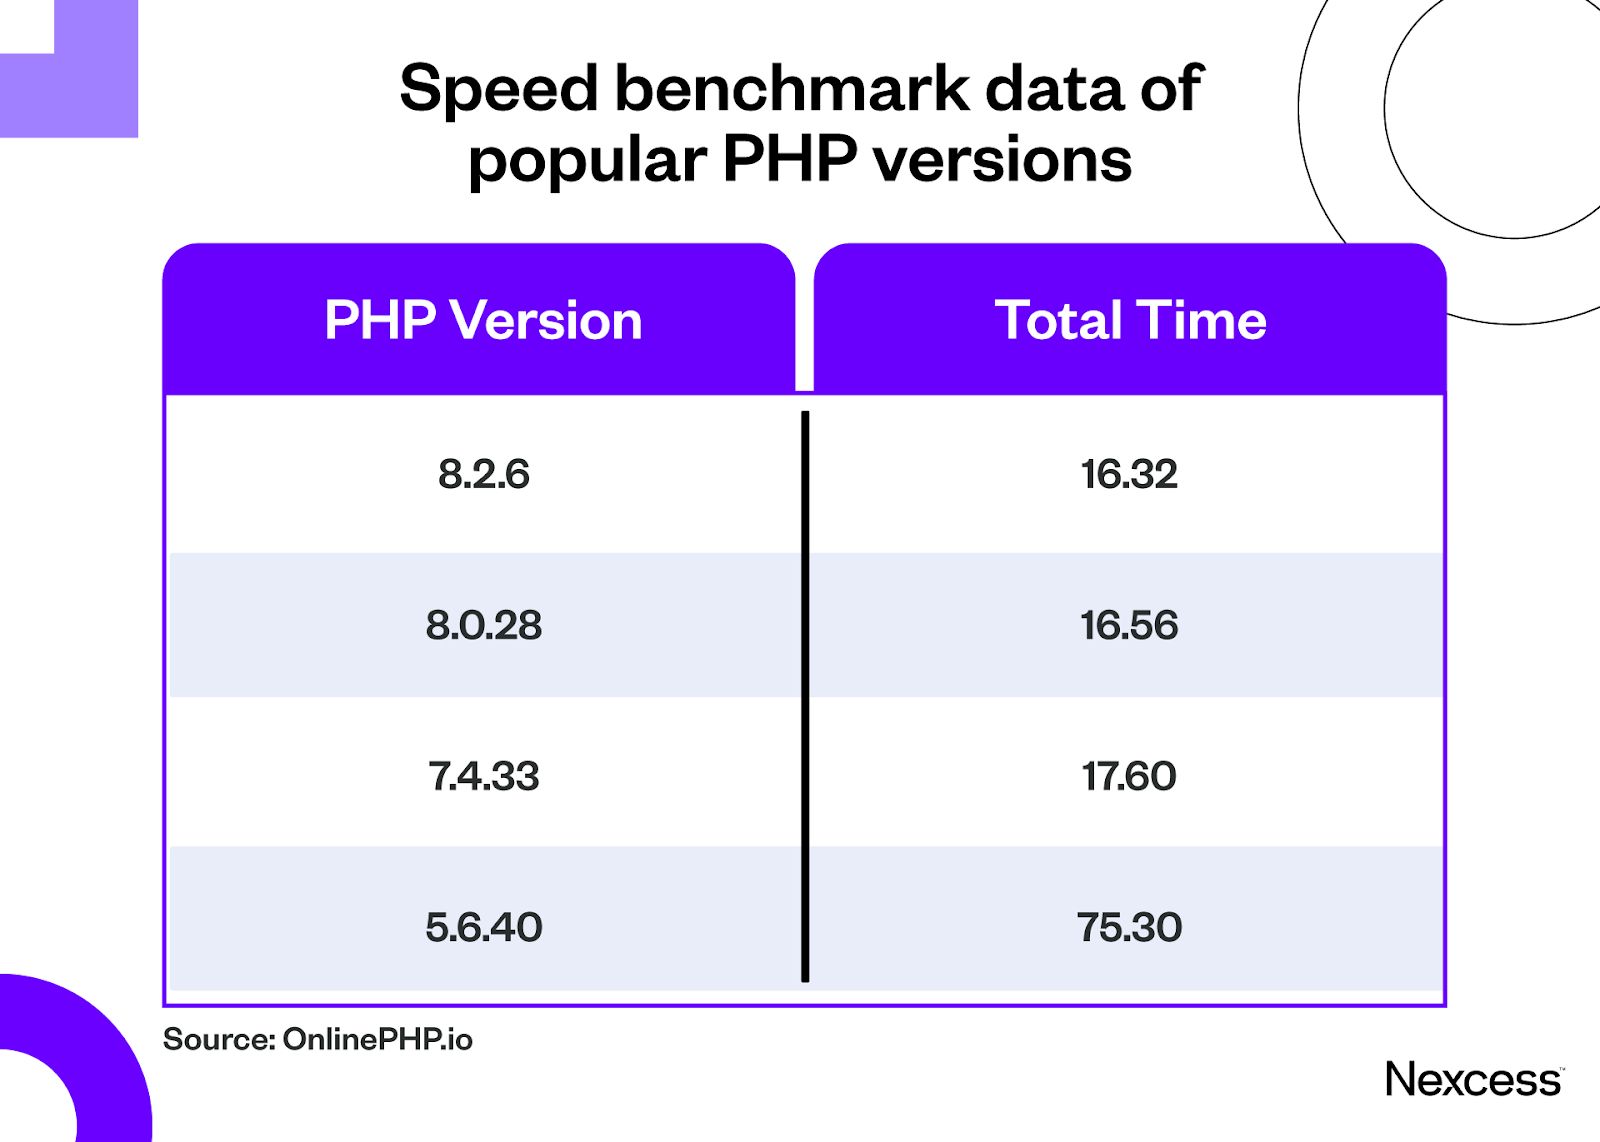 Speed benchmark data of popular PHP versions.